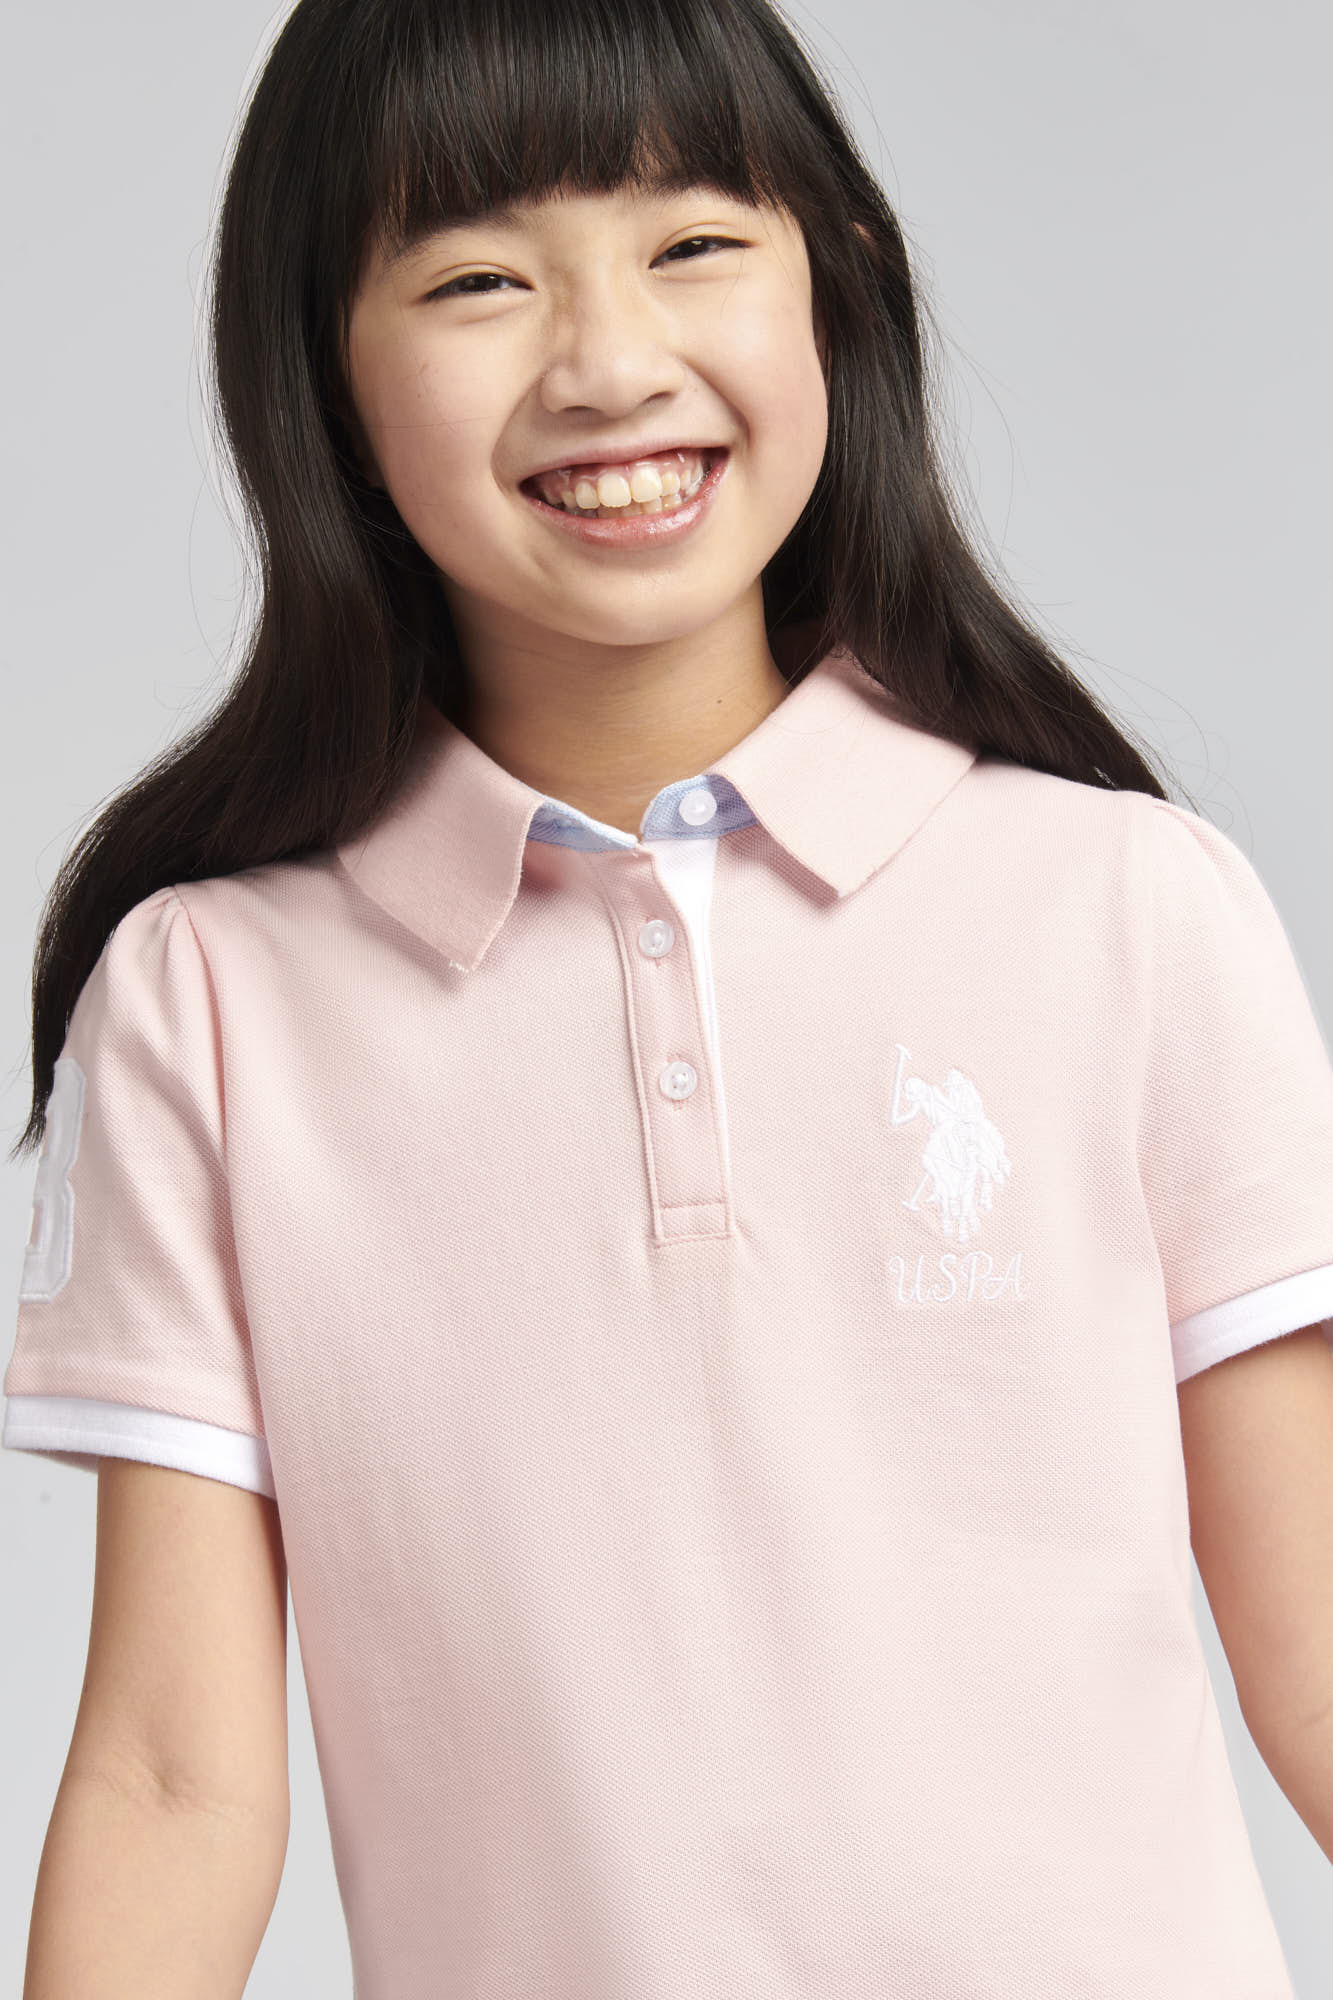 Girls Player 3 Pique Polo Shirt in Crystal Rose